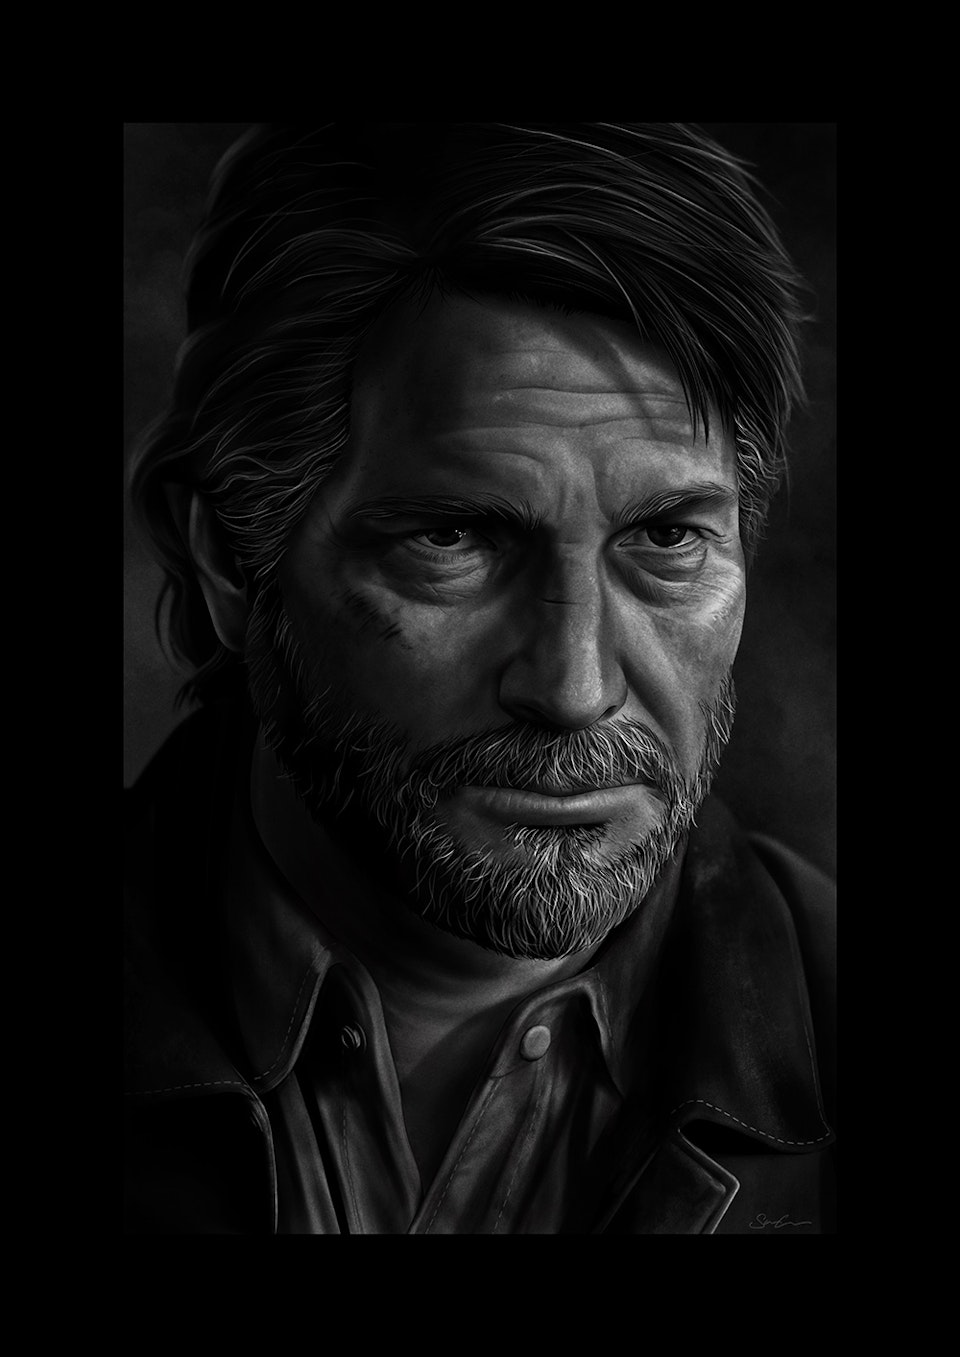 The Last of Us Part II - Character Portraits - Joel
The protagonist of the first game.